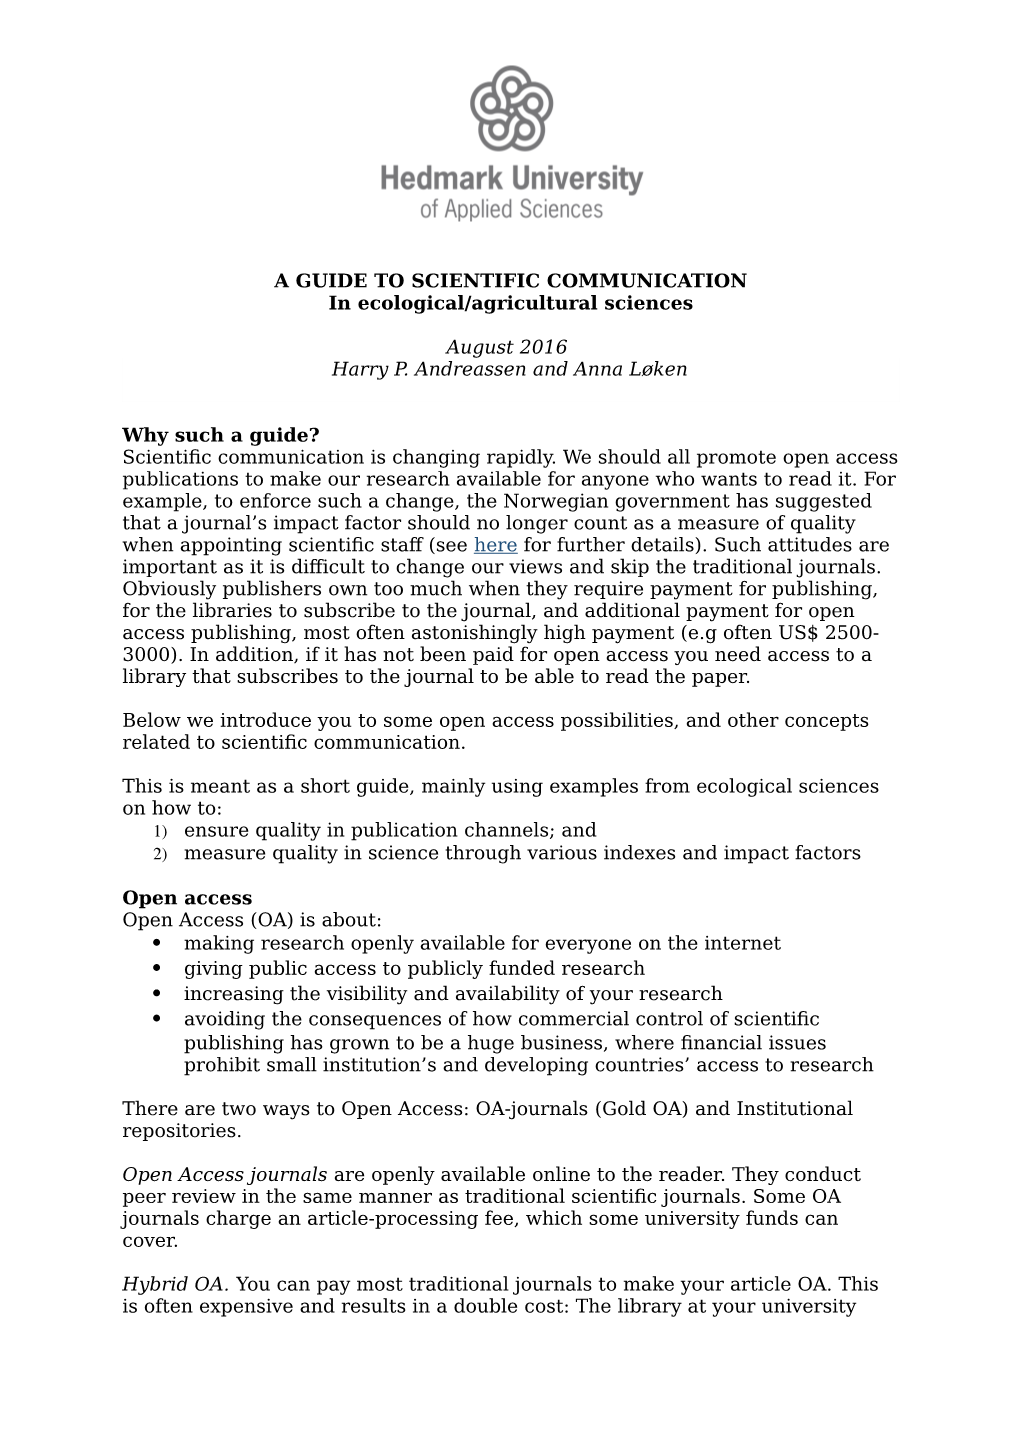 A GUIDE to SCIENTIFIC COMMUNICATION in Ecological/Agricultural Sciences